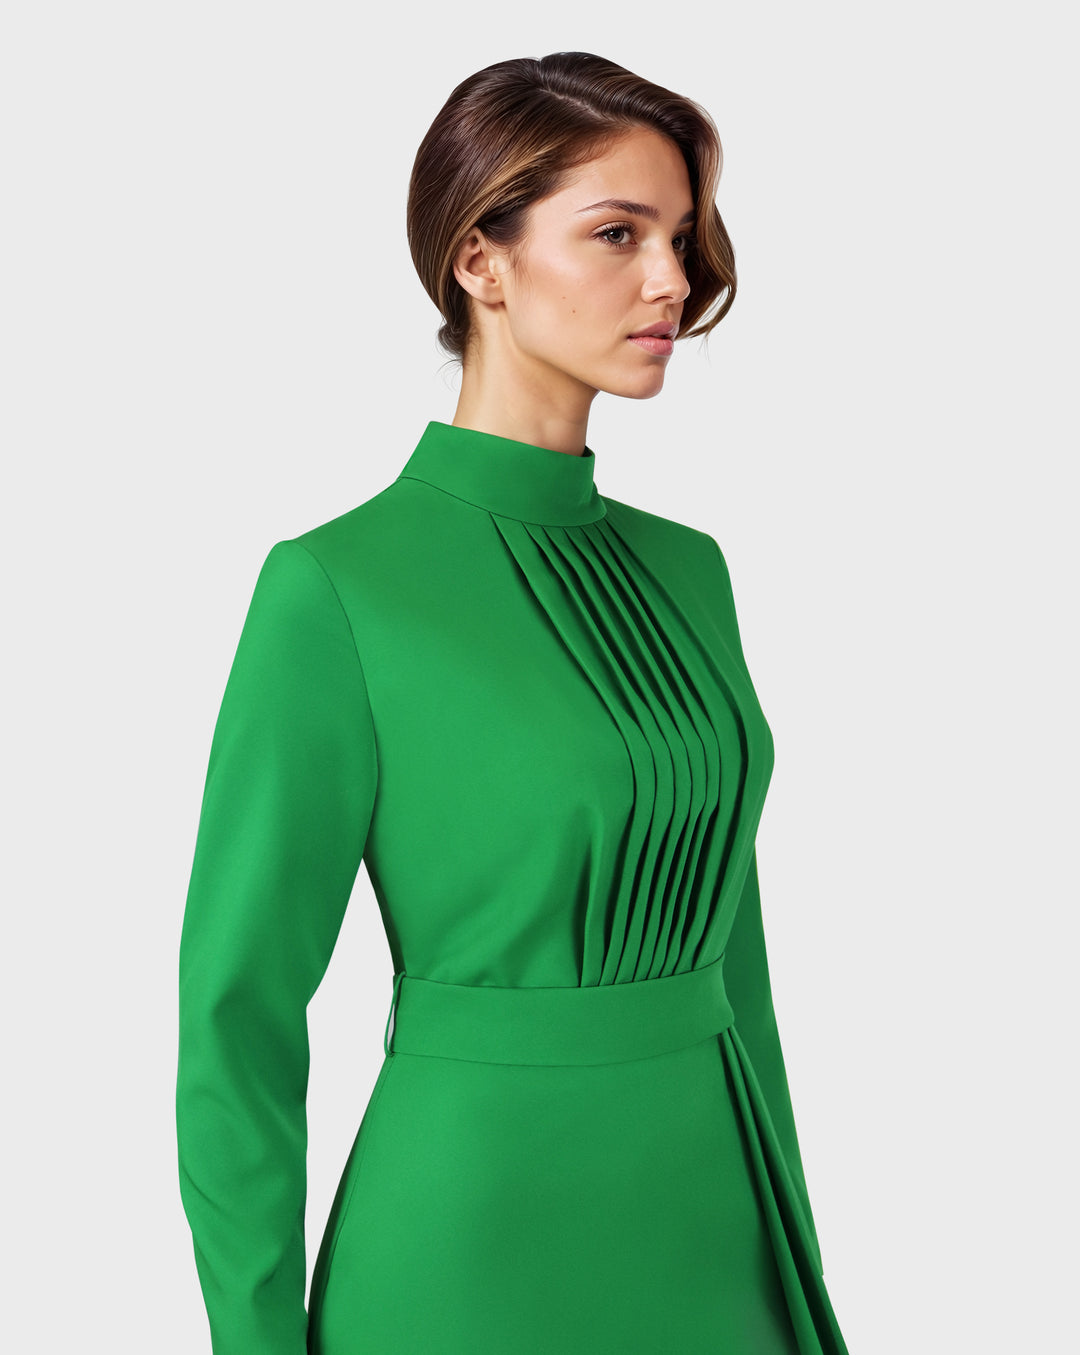 Pleated chest with long sleeves green dress